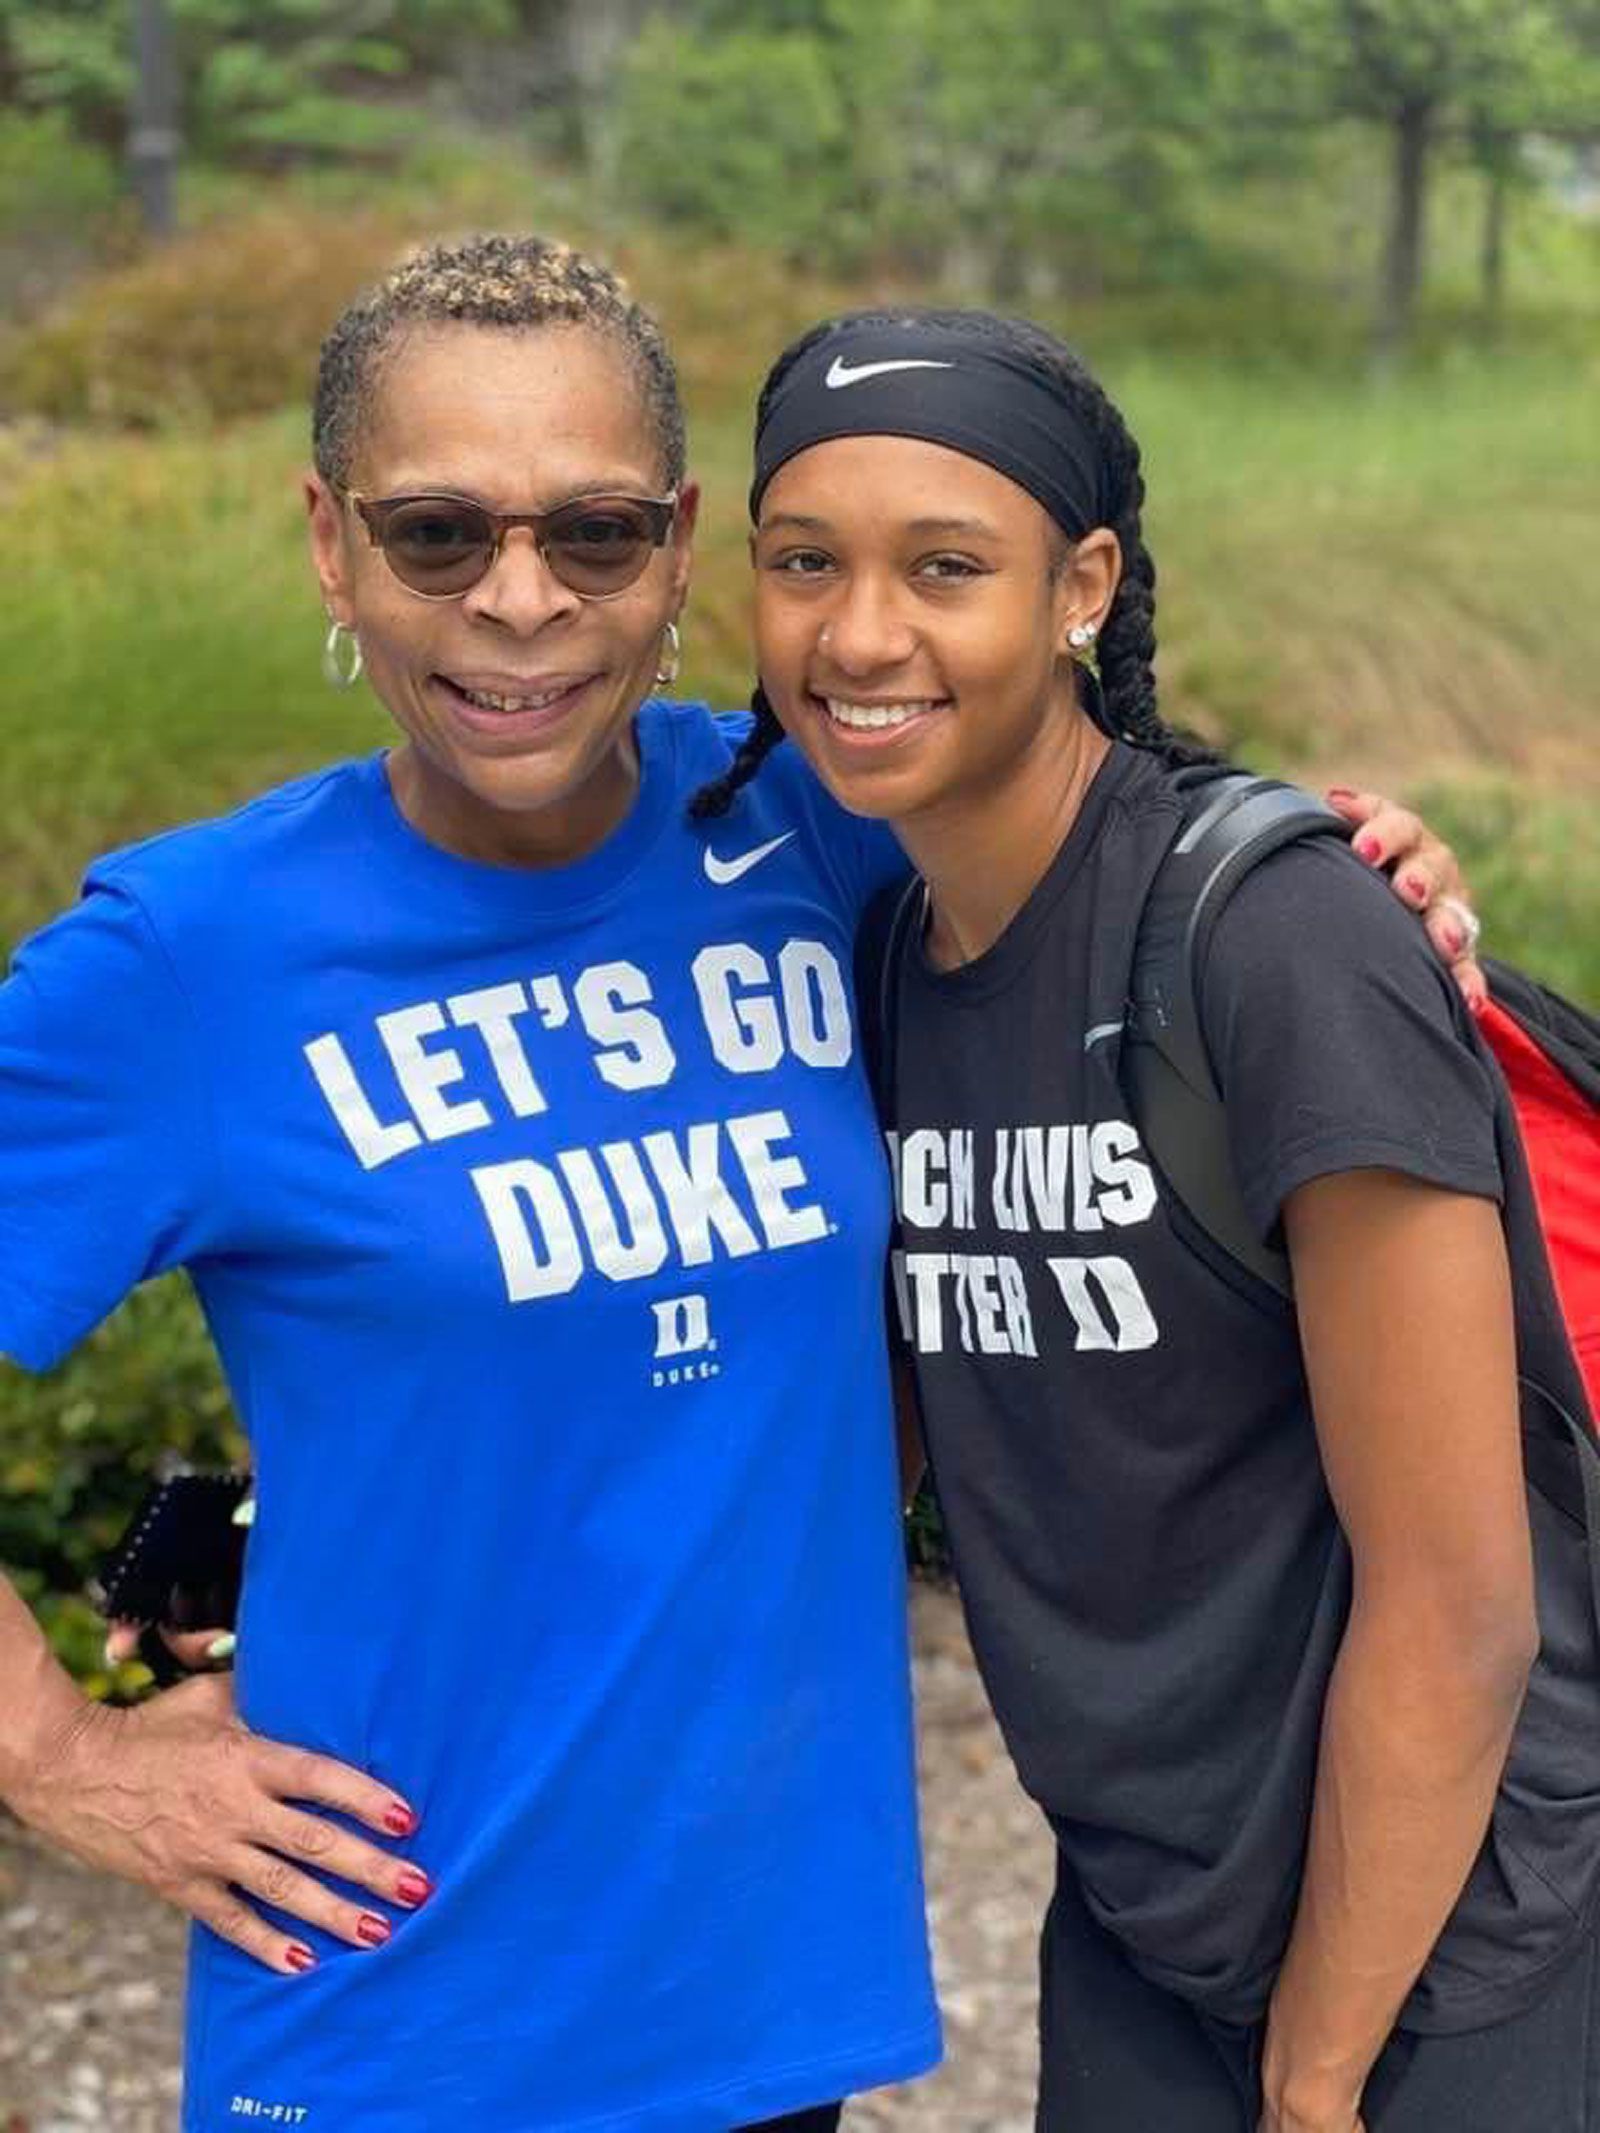 Rachel Richardson: Duke volleyball player's father says his